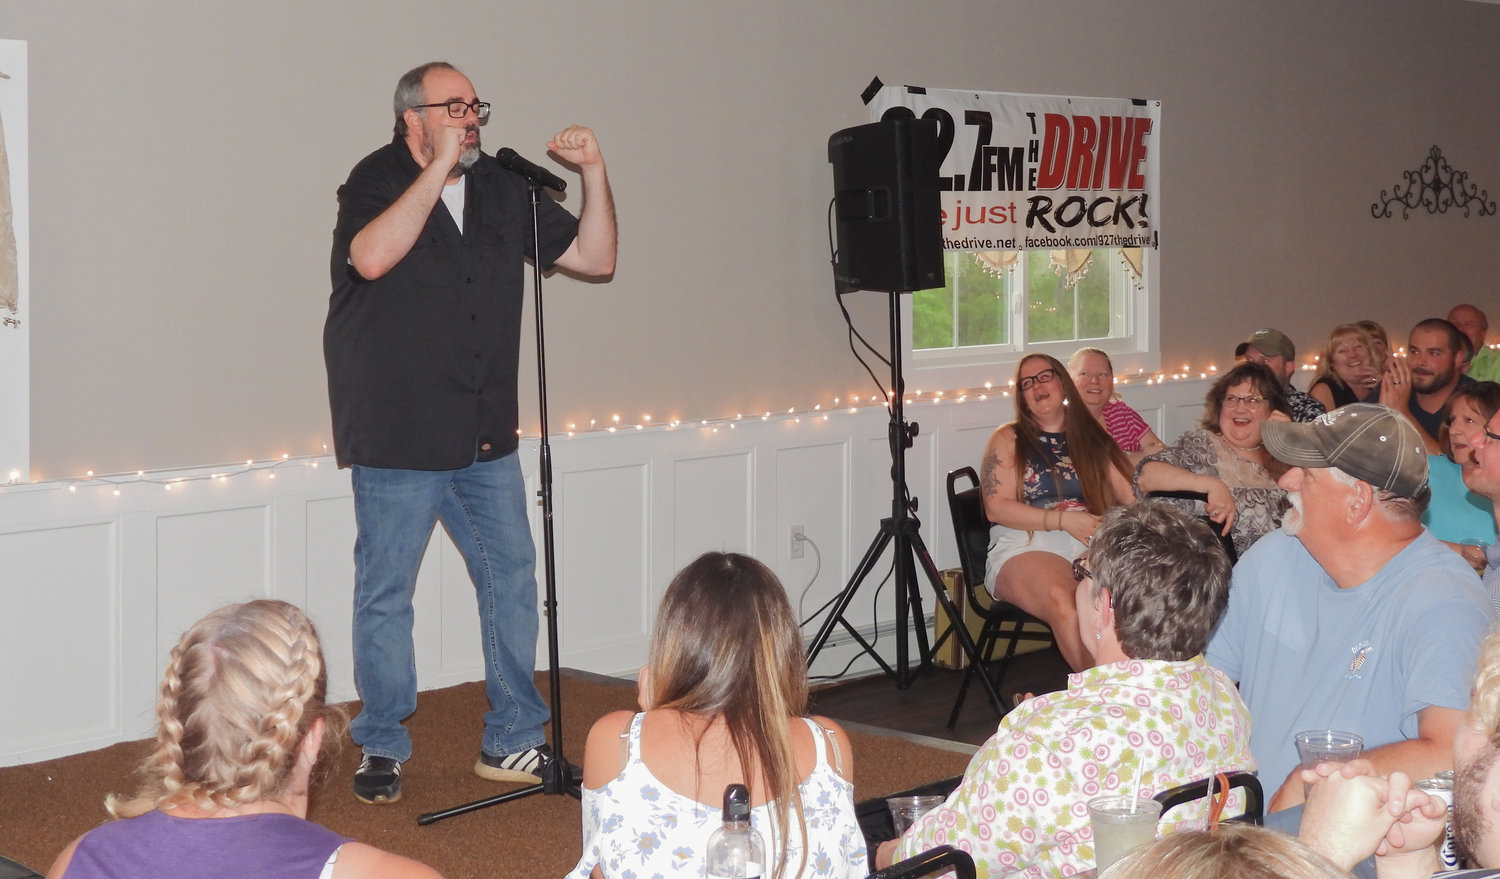 Josh Arnold performs at Cacciatore's Banquet Hall in Ilion as part of the Friends of The Bob and Tom Show Comedy Tour, getting raucous laughter out of show-goers during one particular bit.